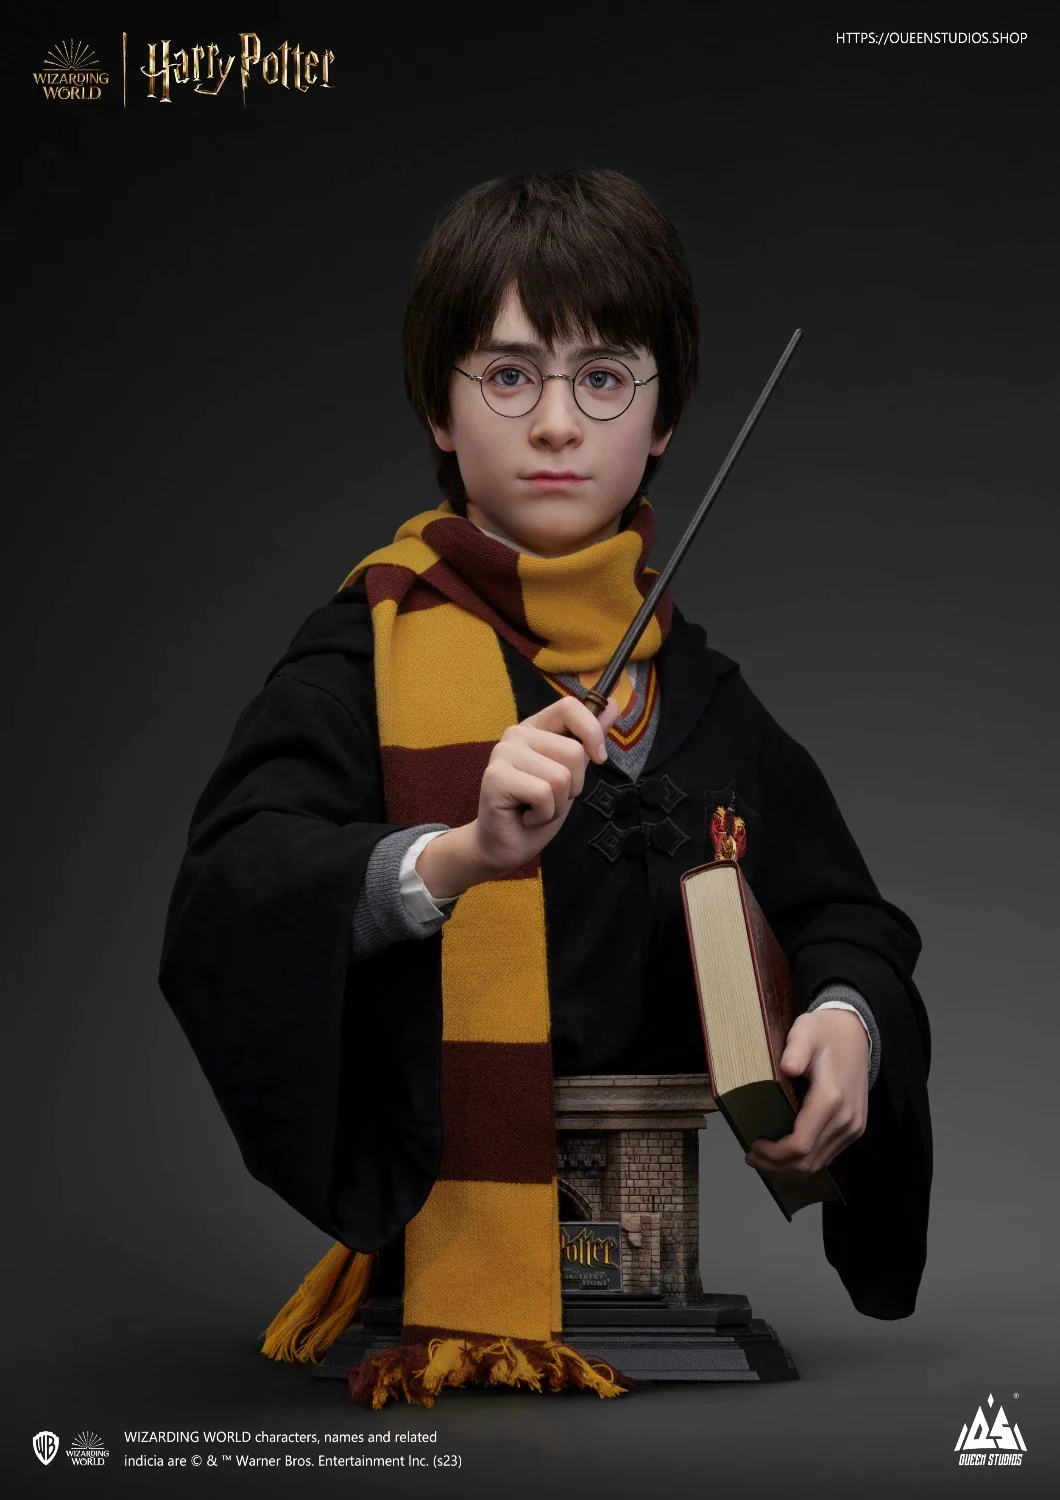 HARRY POTTER LIFE-SIZE BUST